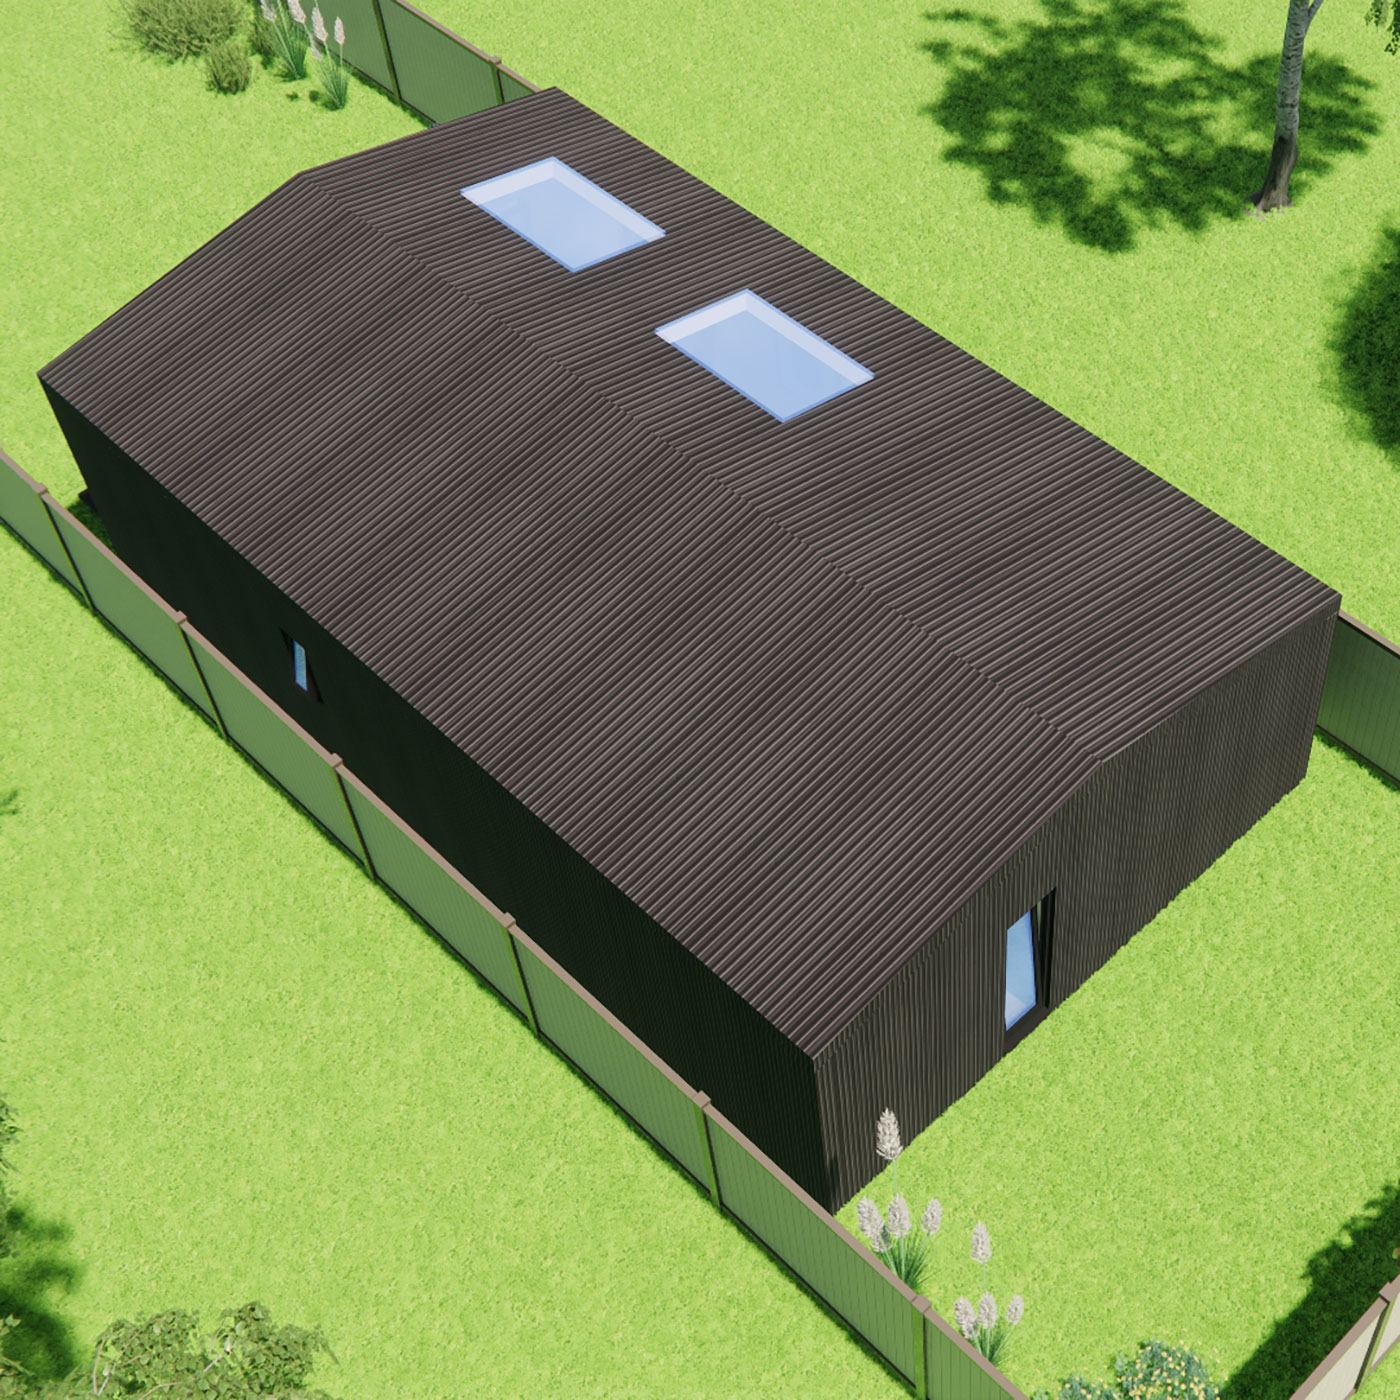 3D Visualisation of mobile home 6.5m by 10.9m